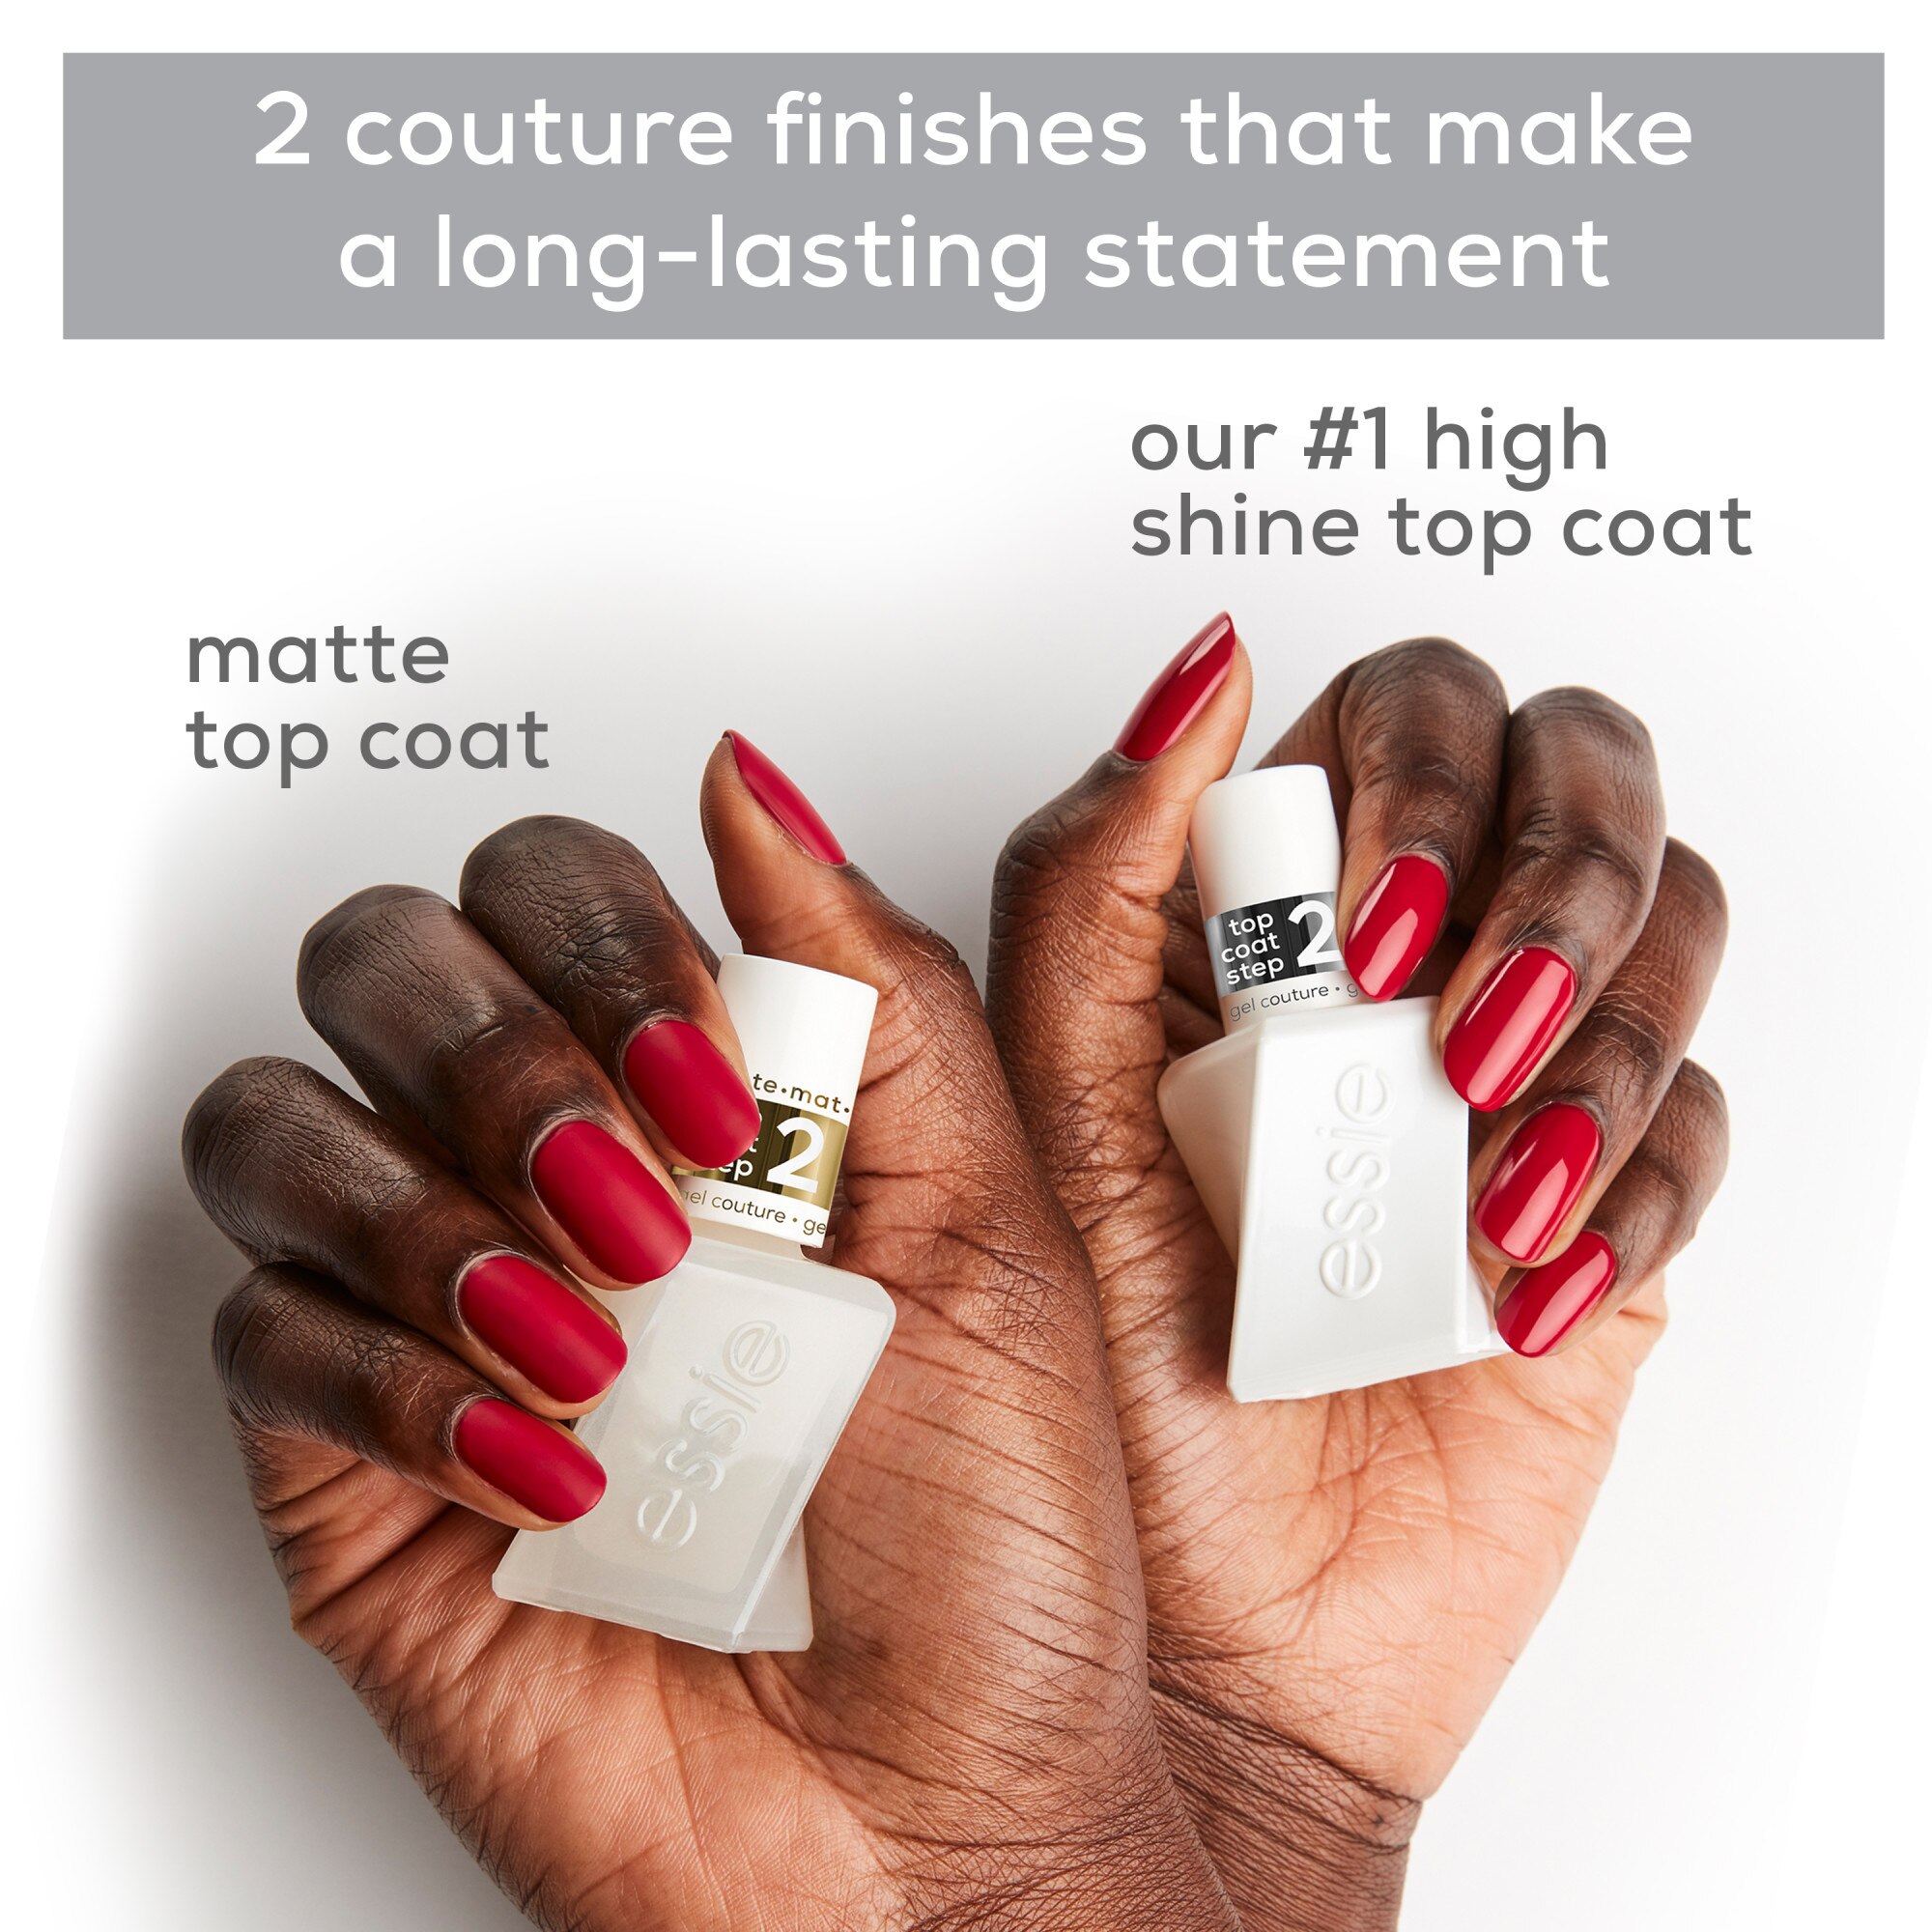 Gel Couture Long-lasting Nail Polish, 8-free fairy tailor, sheer nude pink - CVS Pharmacy